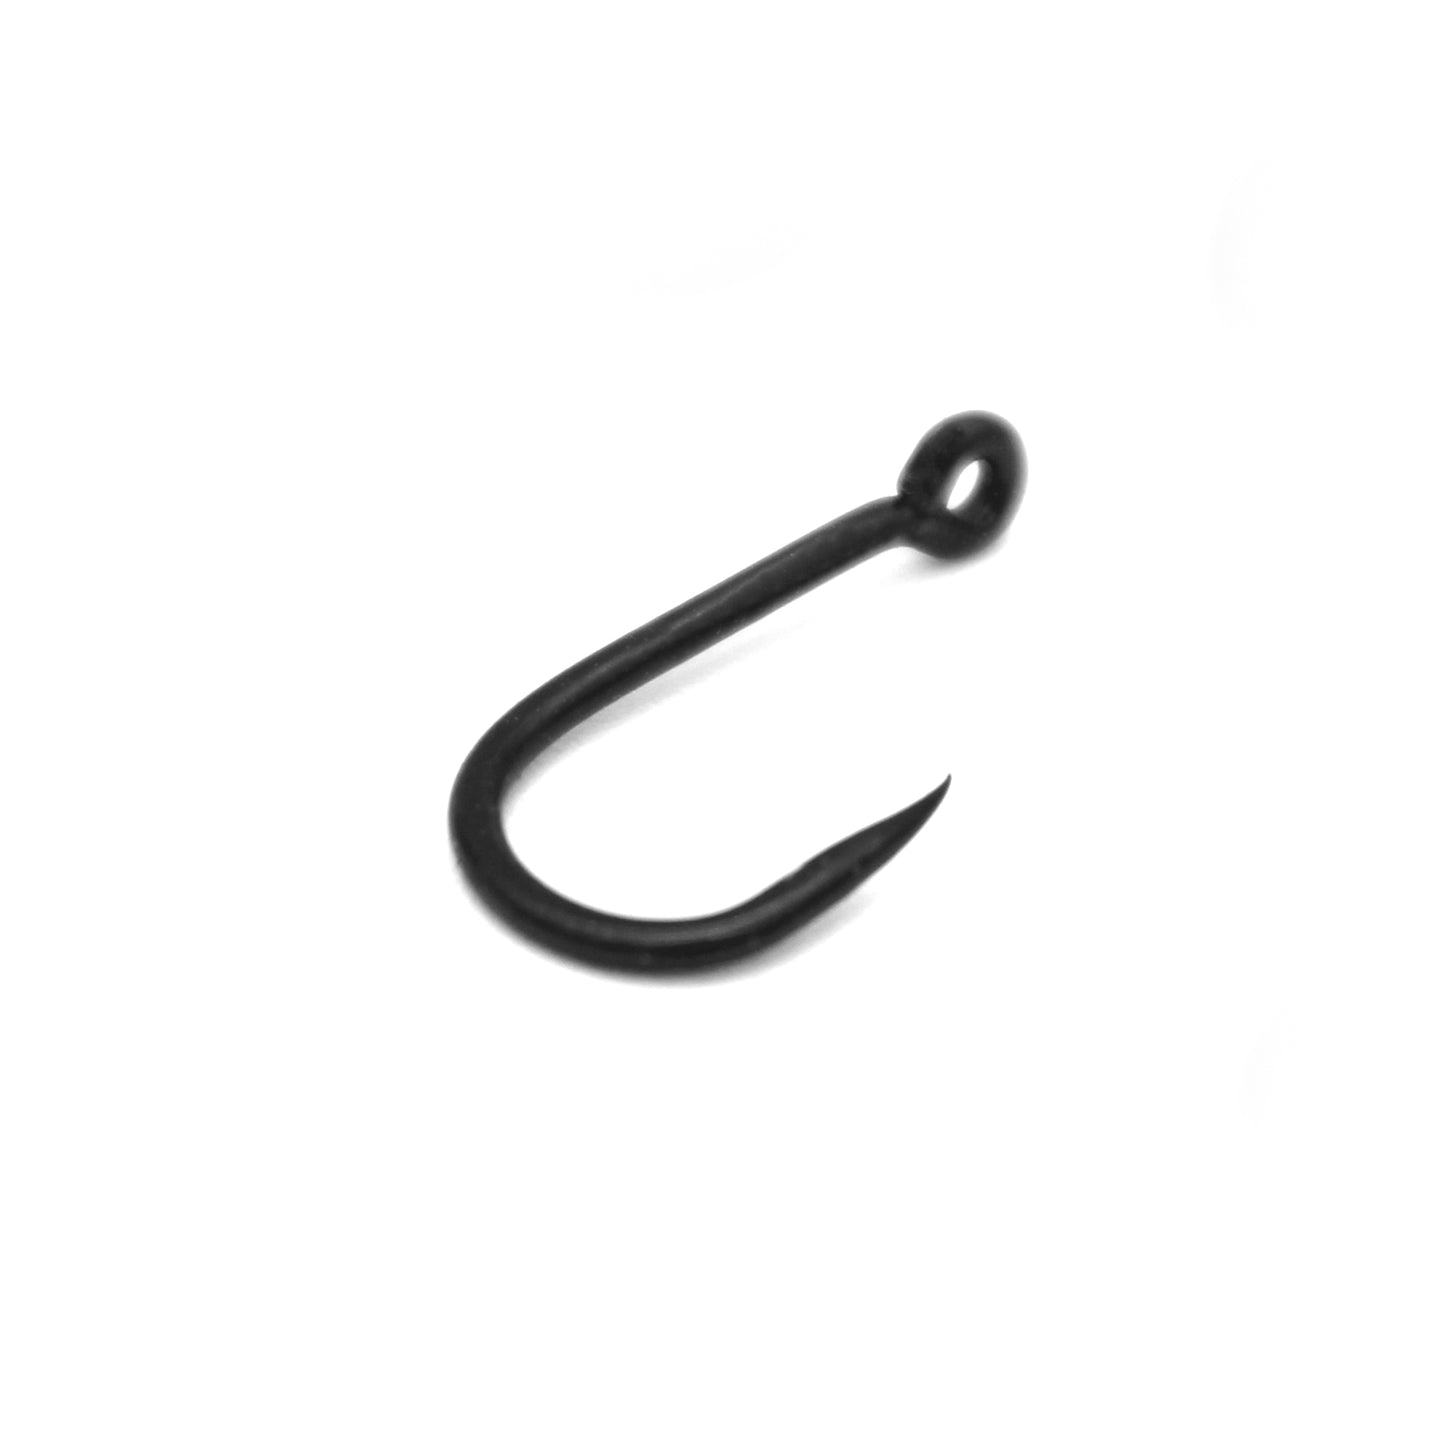 Deception Angling ZWG Barbless Fishing Hook